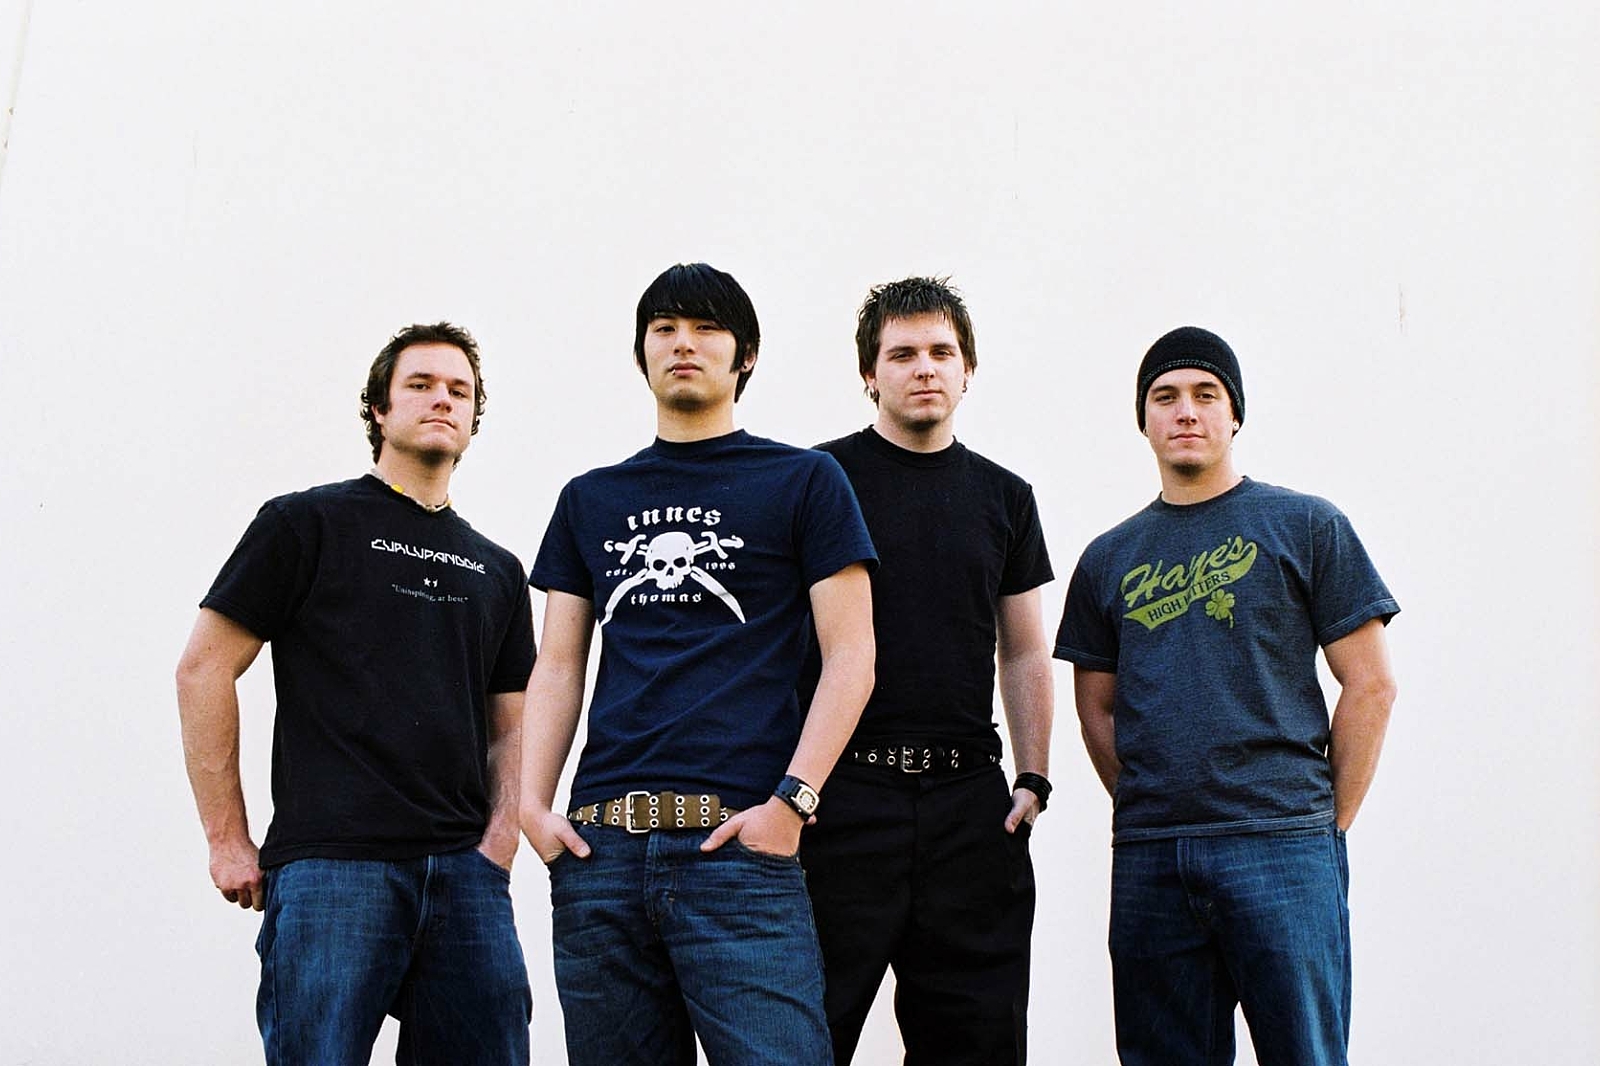 Could Thrice be making a comeback in 2015?